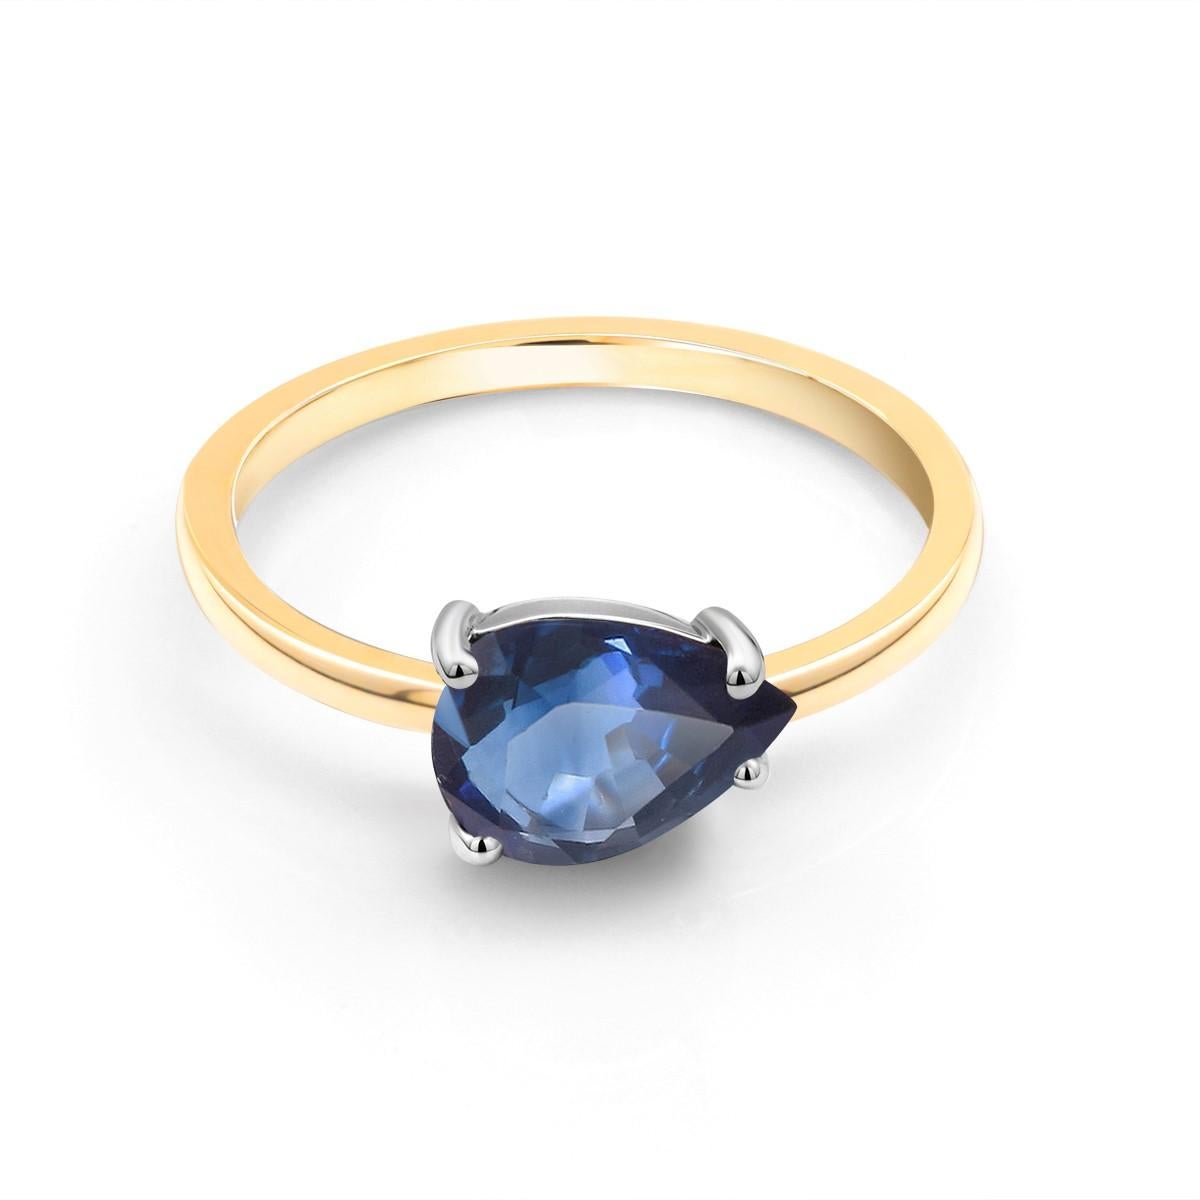 Women's Pear-Shaped Sapphire White and Yellow Gold Cocktail Ring